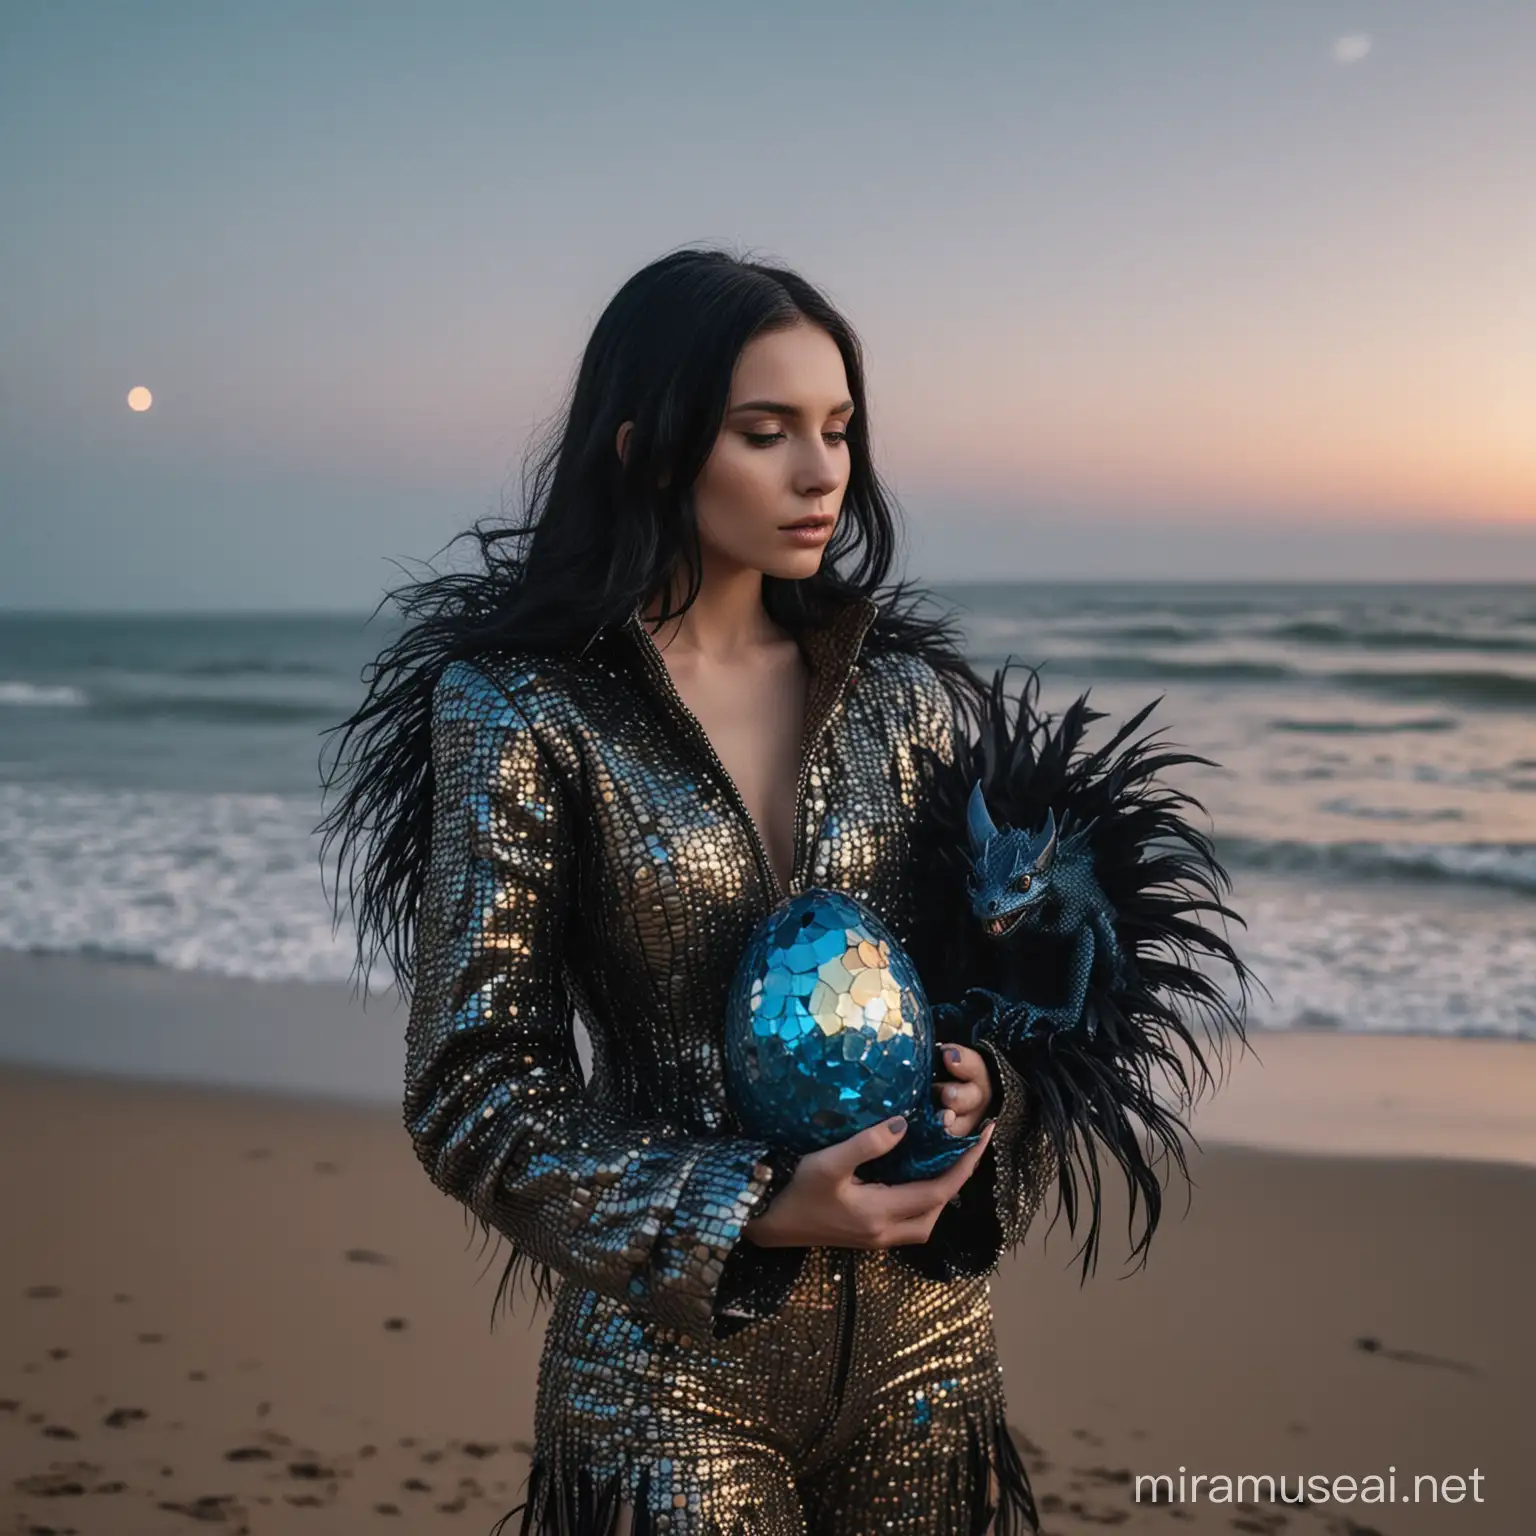 A white skinned woman model holding a metallic black blue colored tiny dragon inside a golden cracked eggshell, pearl iridescent, wearing metallic black shiny Schiapirelli inspired couture feather jacket, silver shiny crone, extreme long black hair, wes anderson color palette, night with huge moon beach background, 35mm photography